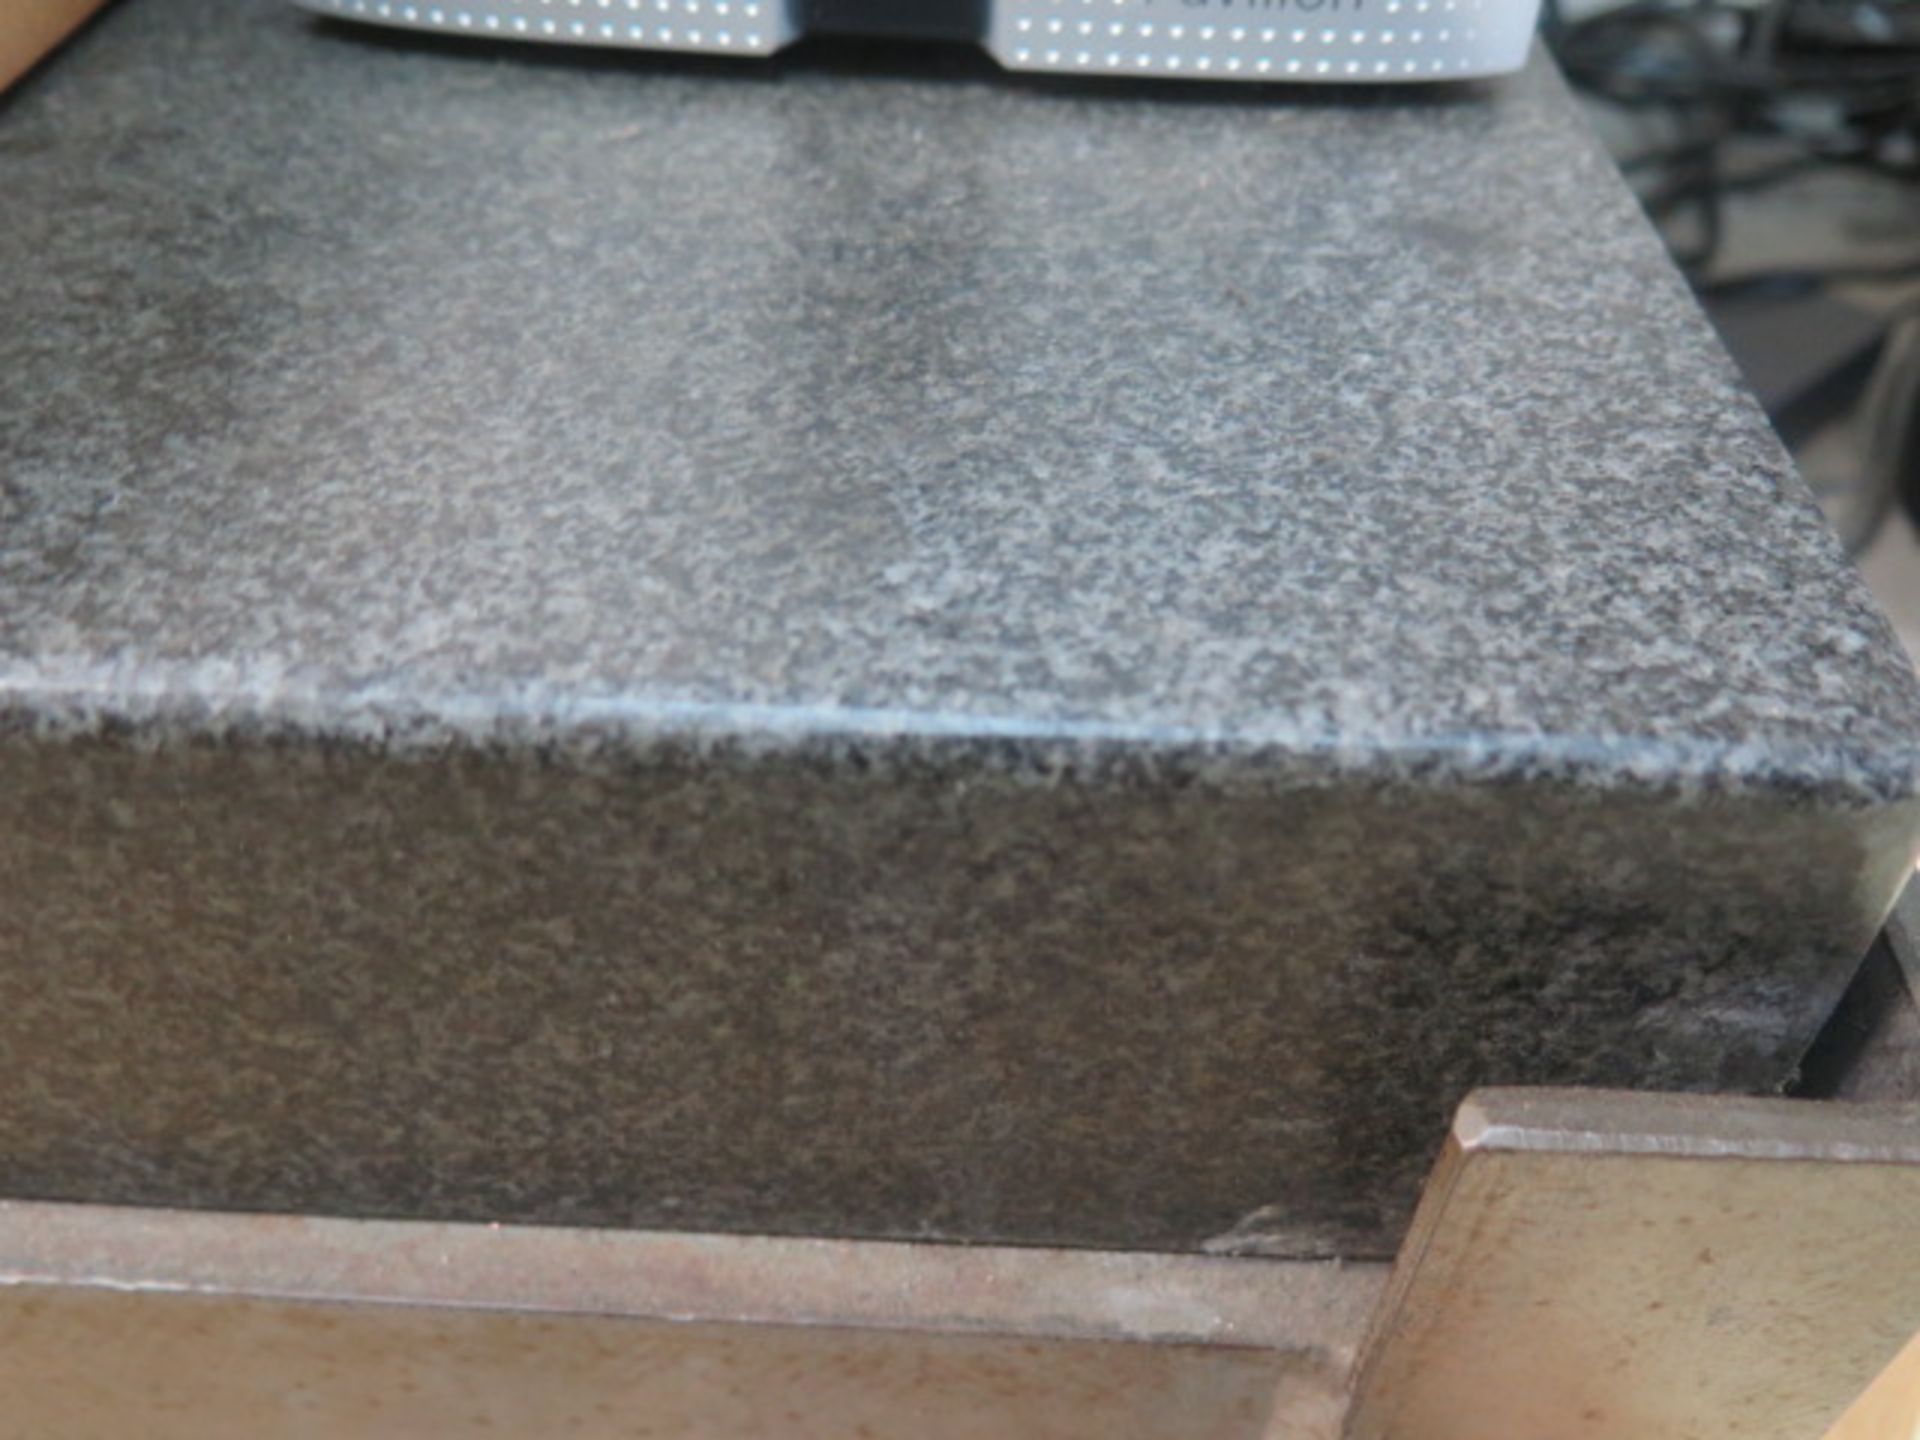 Mojave 24" x 36" x 3" Granite Surface Plate w/ Roll Stand (SOLD AS-IS - NO WARRANTY) - Image 3 of 4